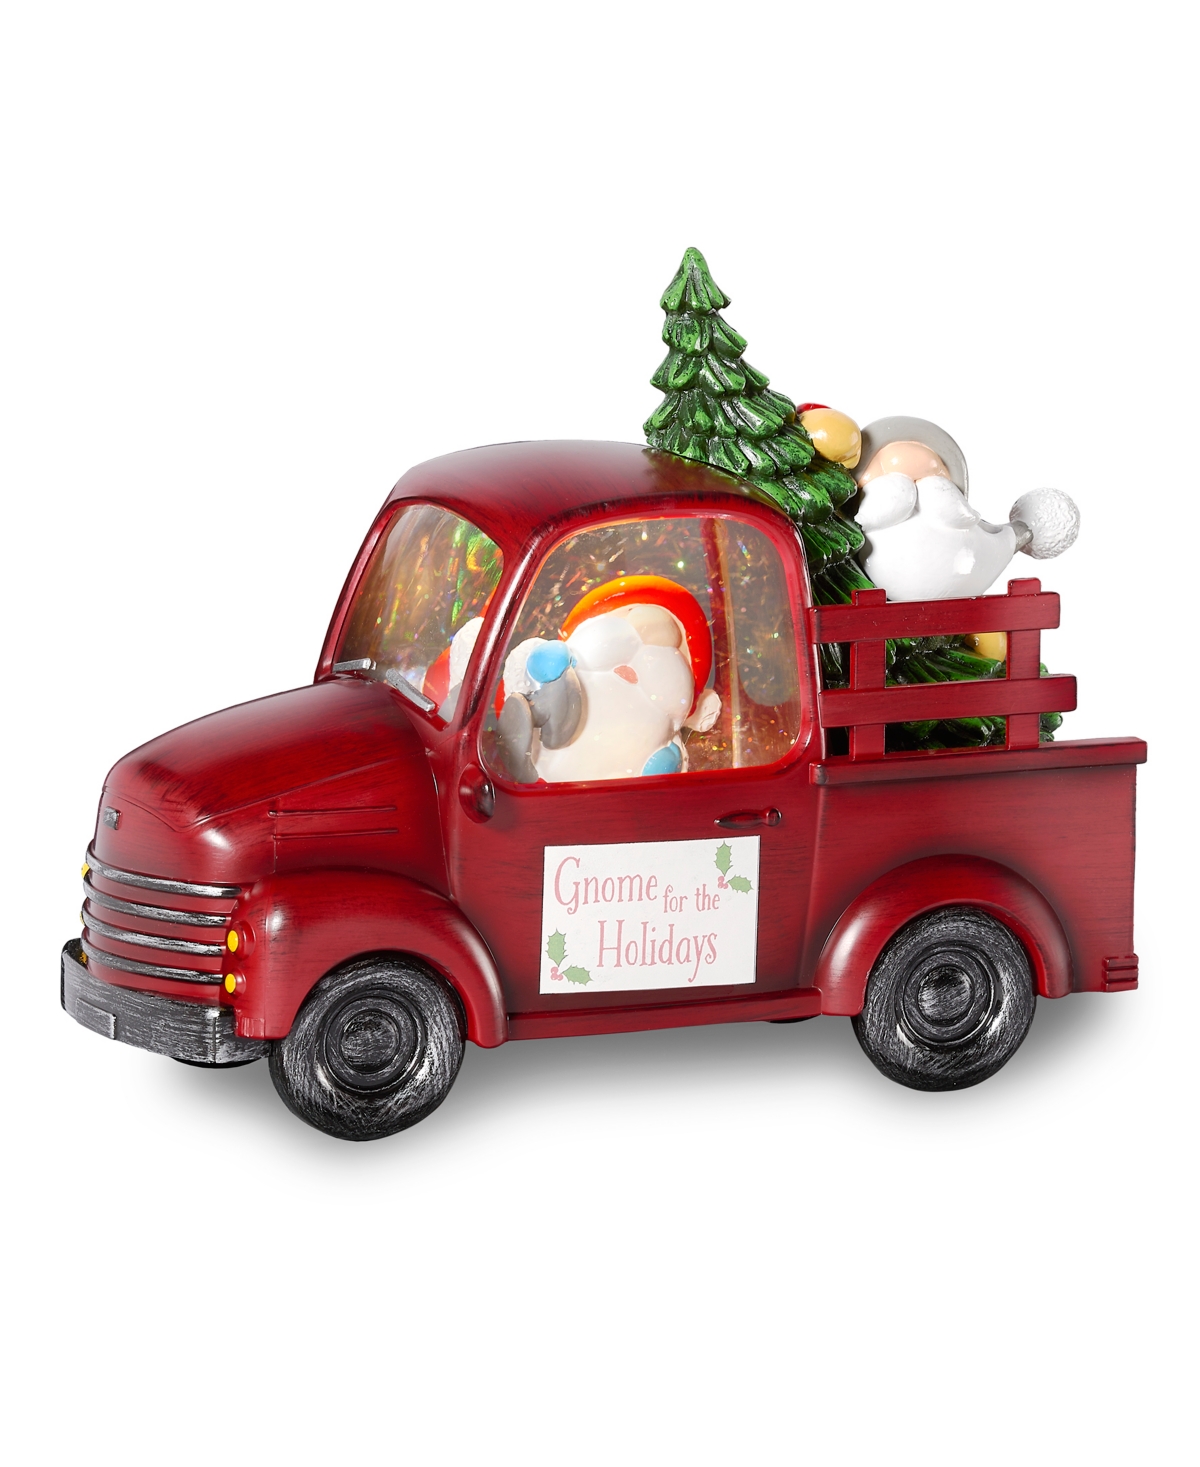 Roman 7.75" H Light Emitting Diode (led) Swirl Truck, Gnomes In Multi Color